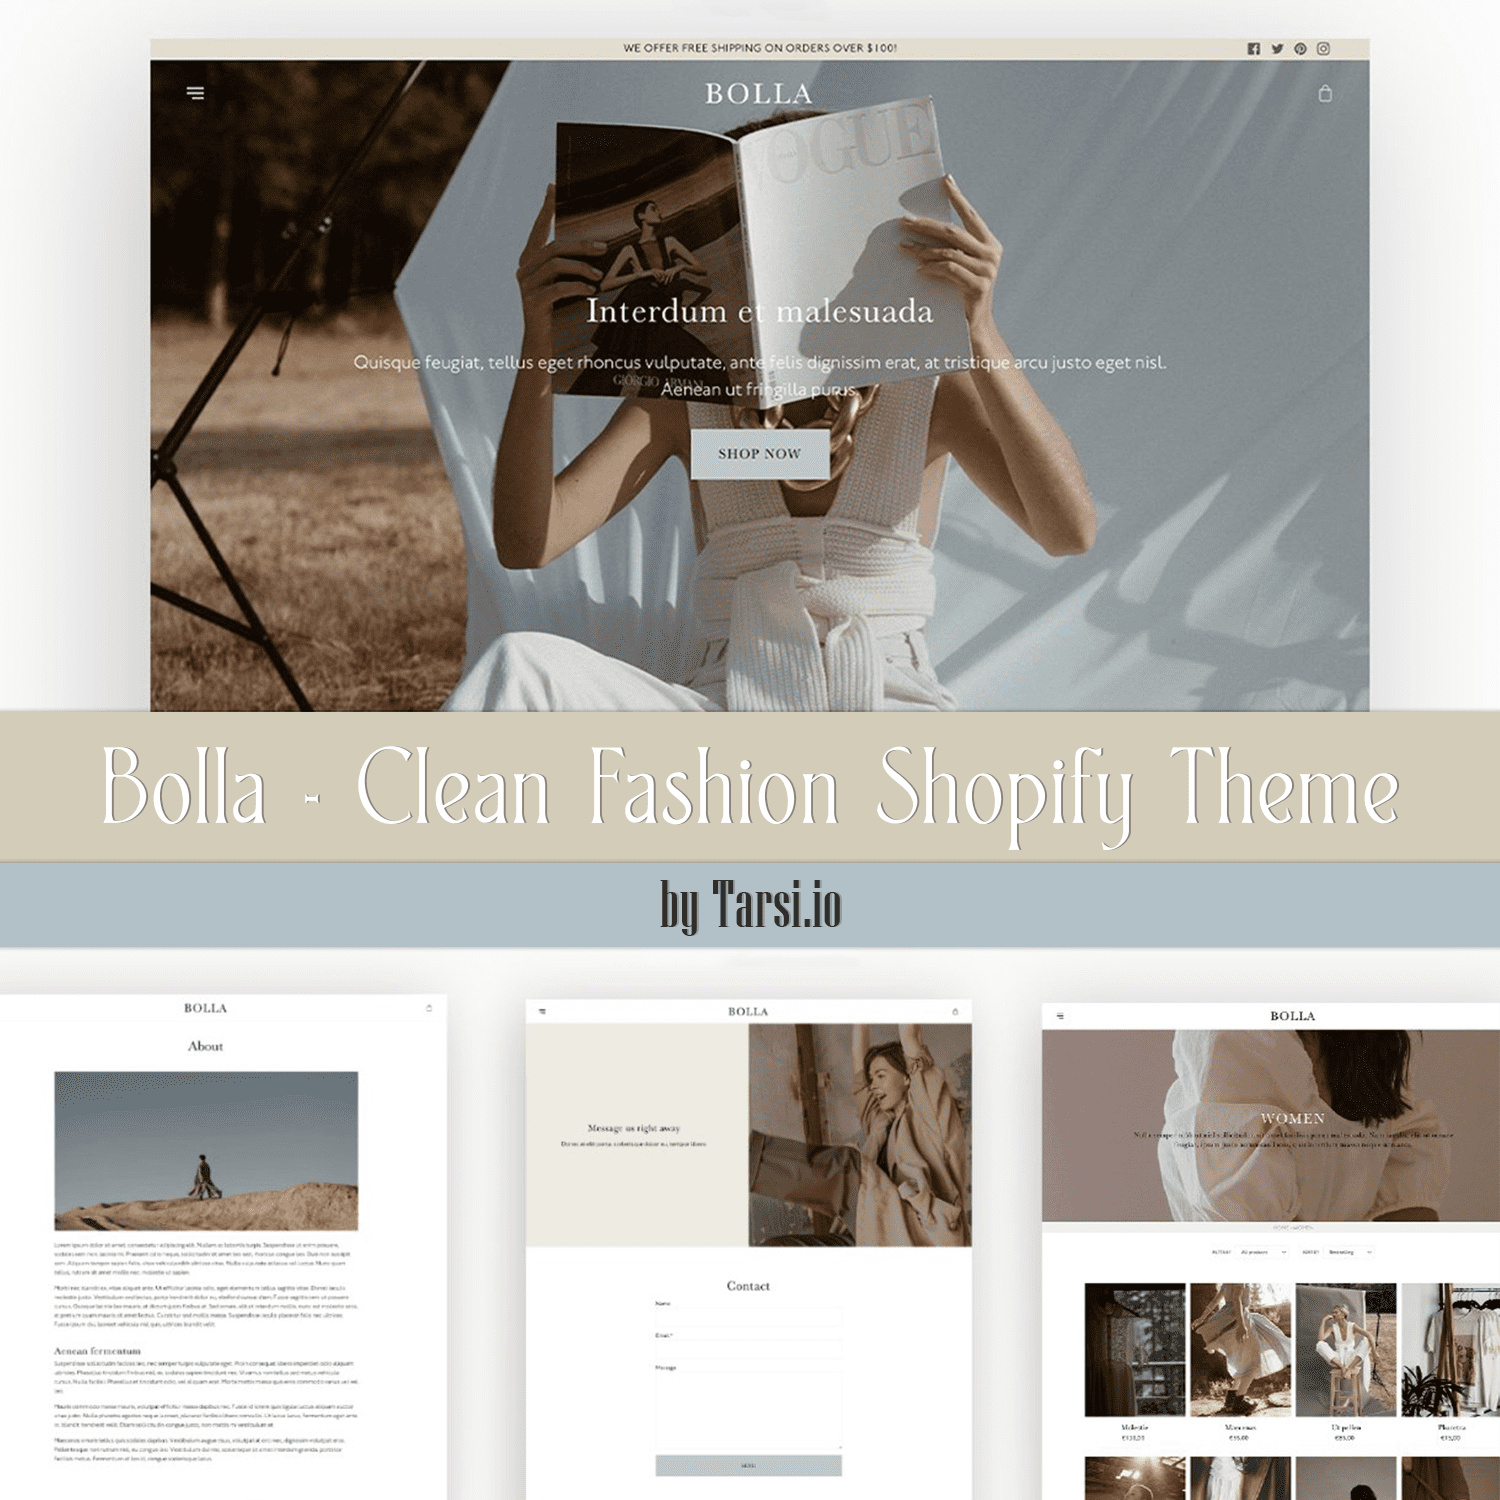 Image collection of colorful shopify theme pages.